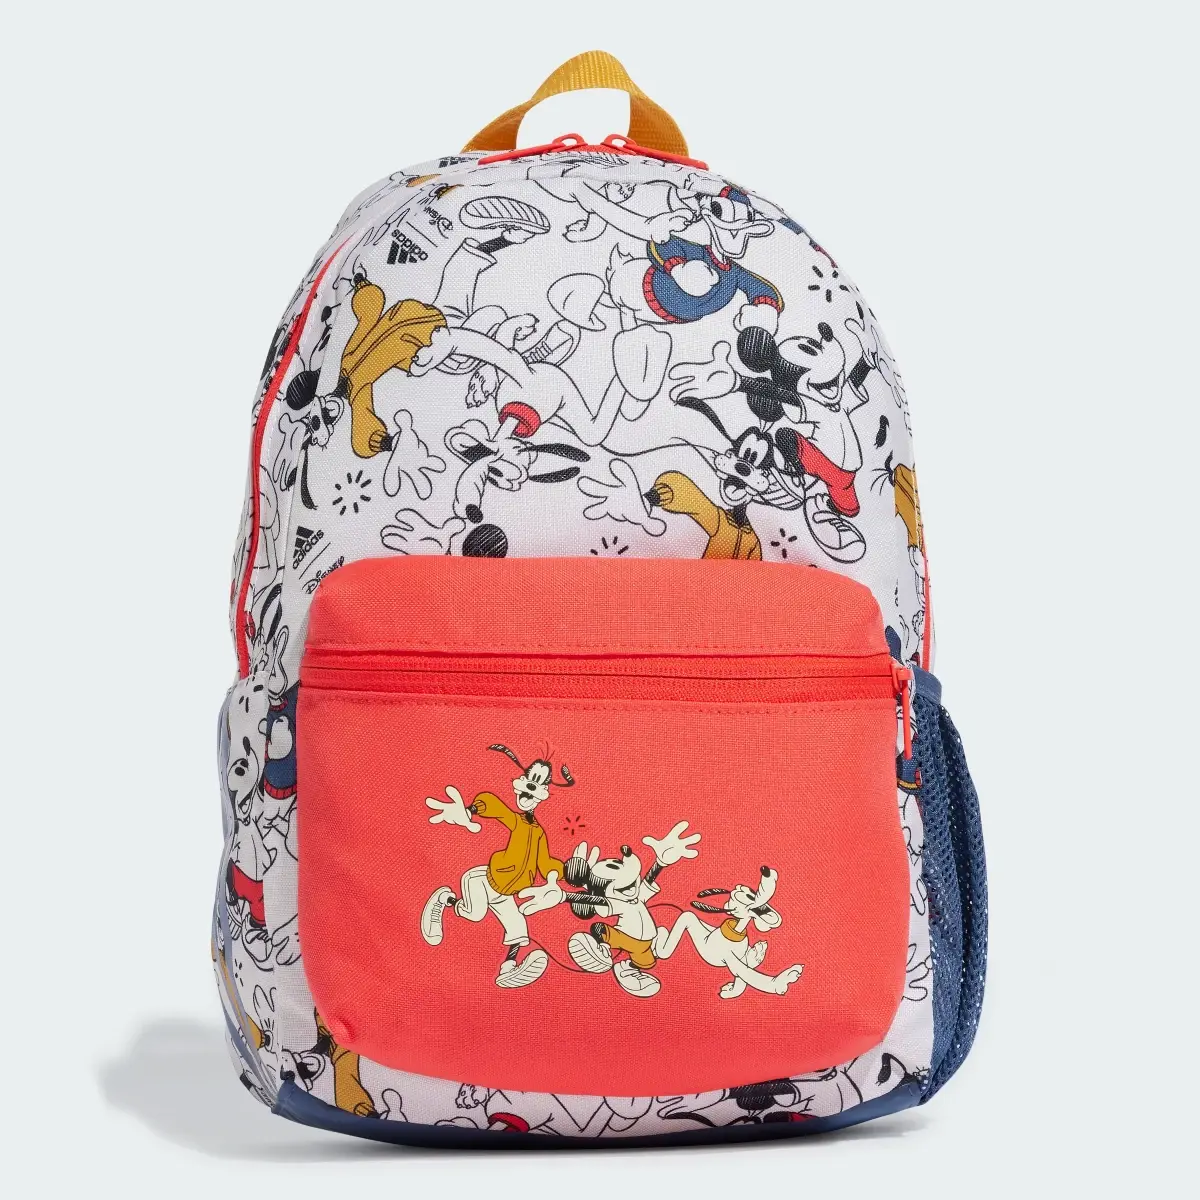 Adidas Disney's Mickey Mouse Backpack. 2